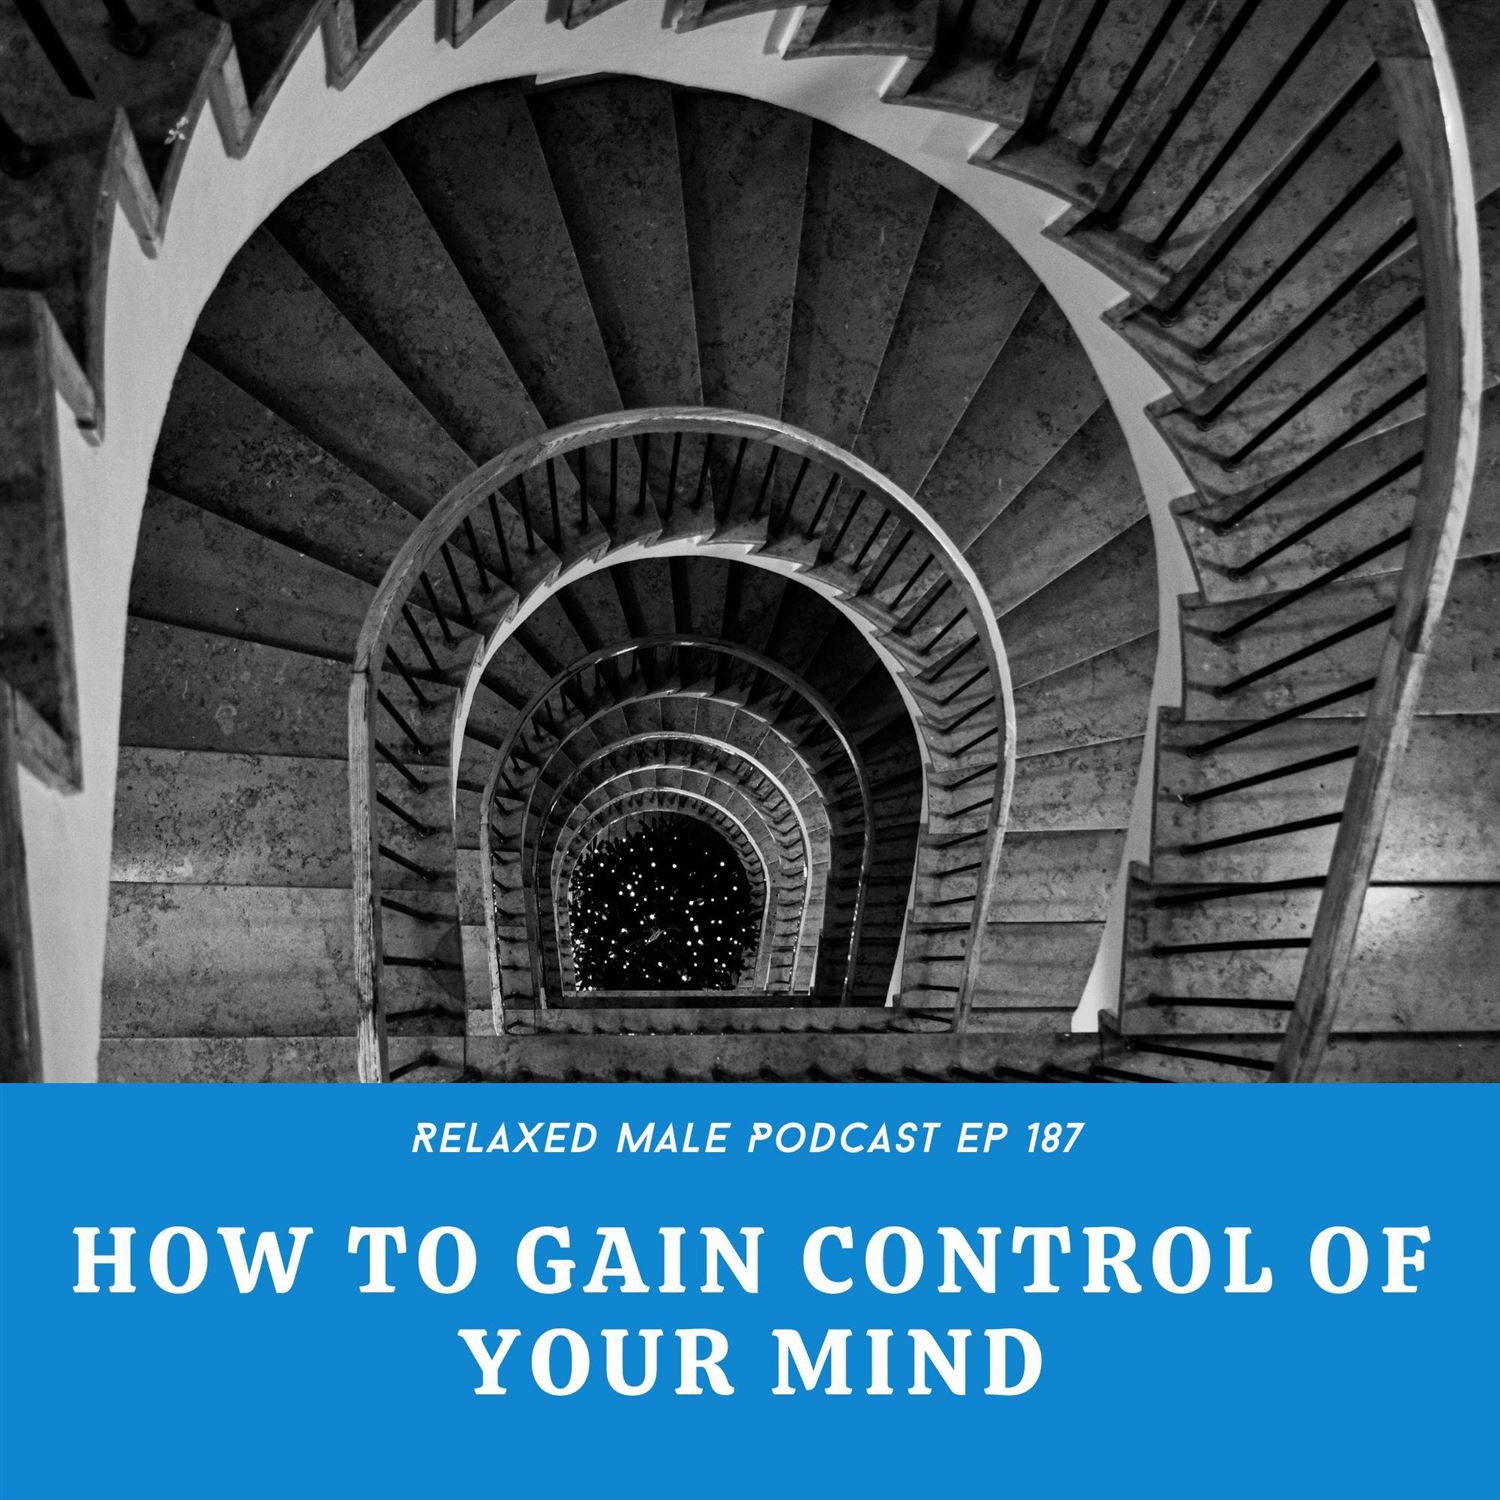 How to Gain Control Of Your Mind